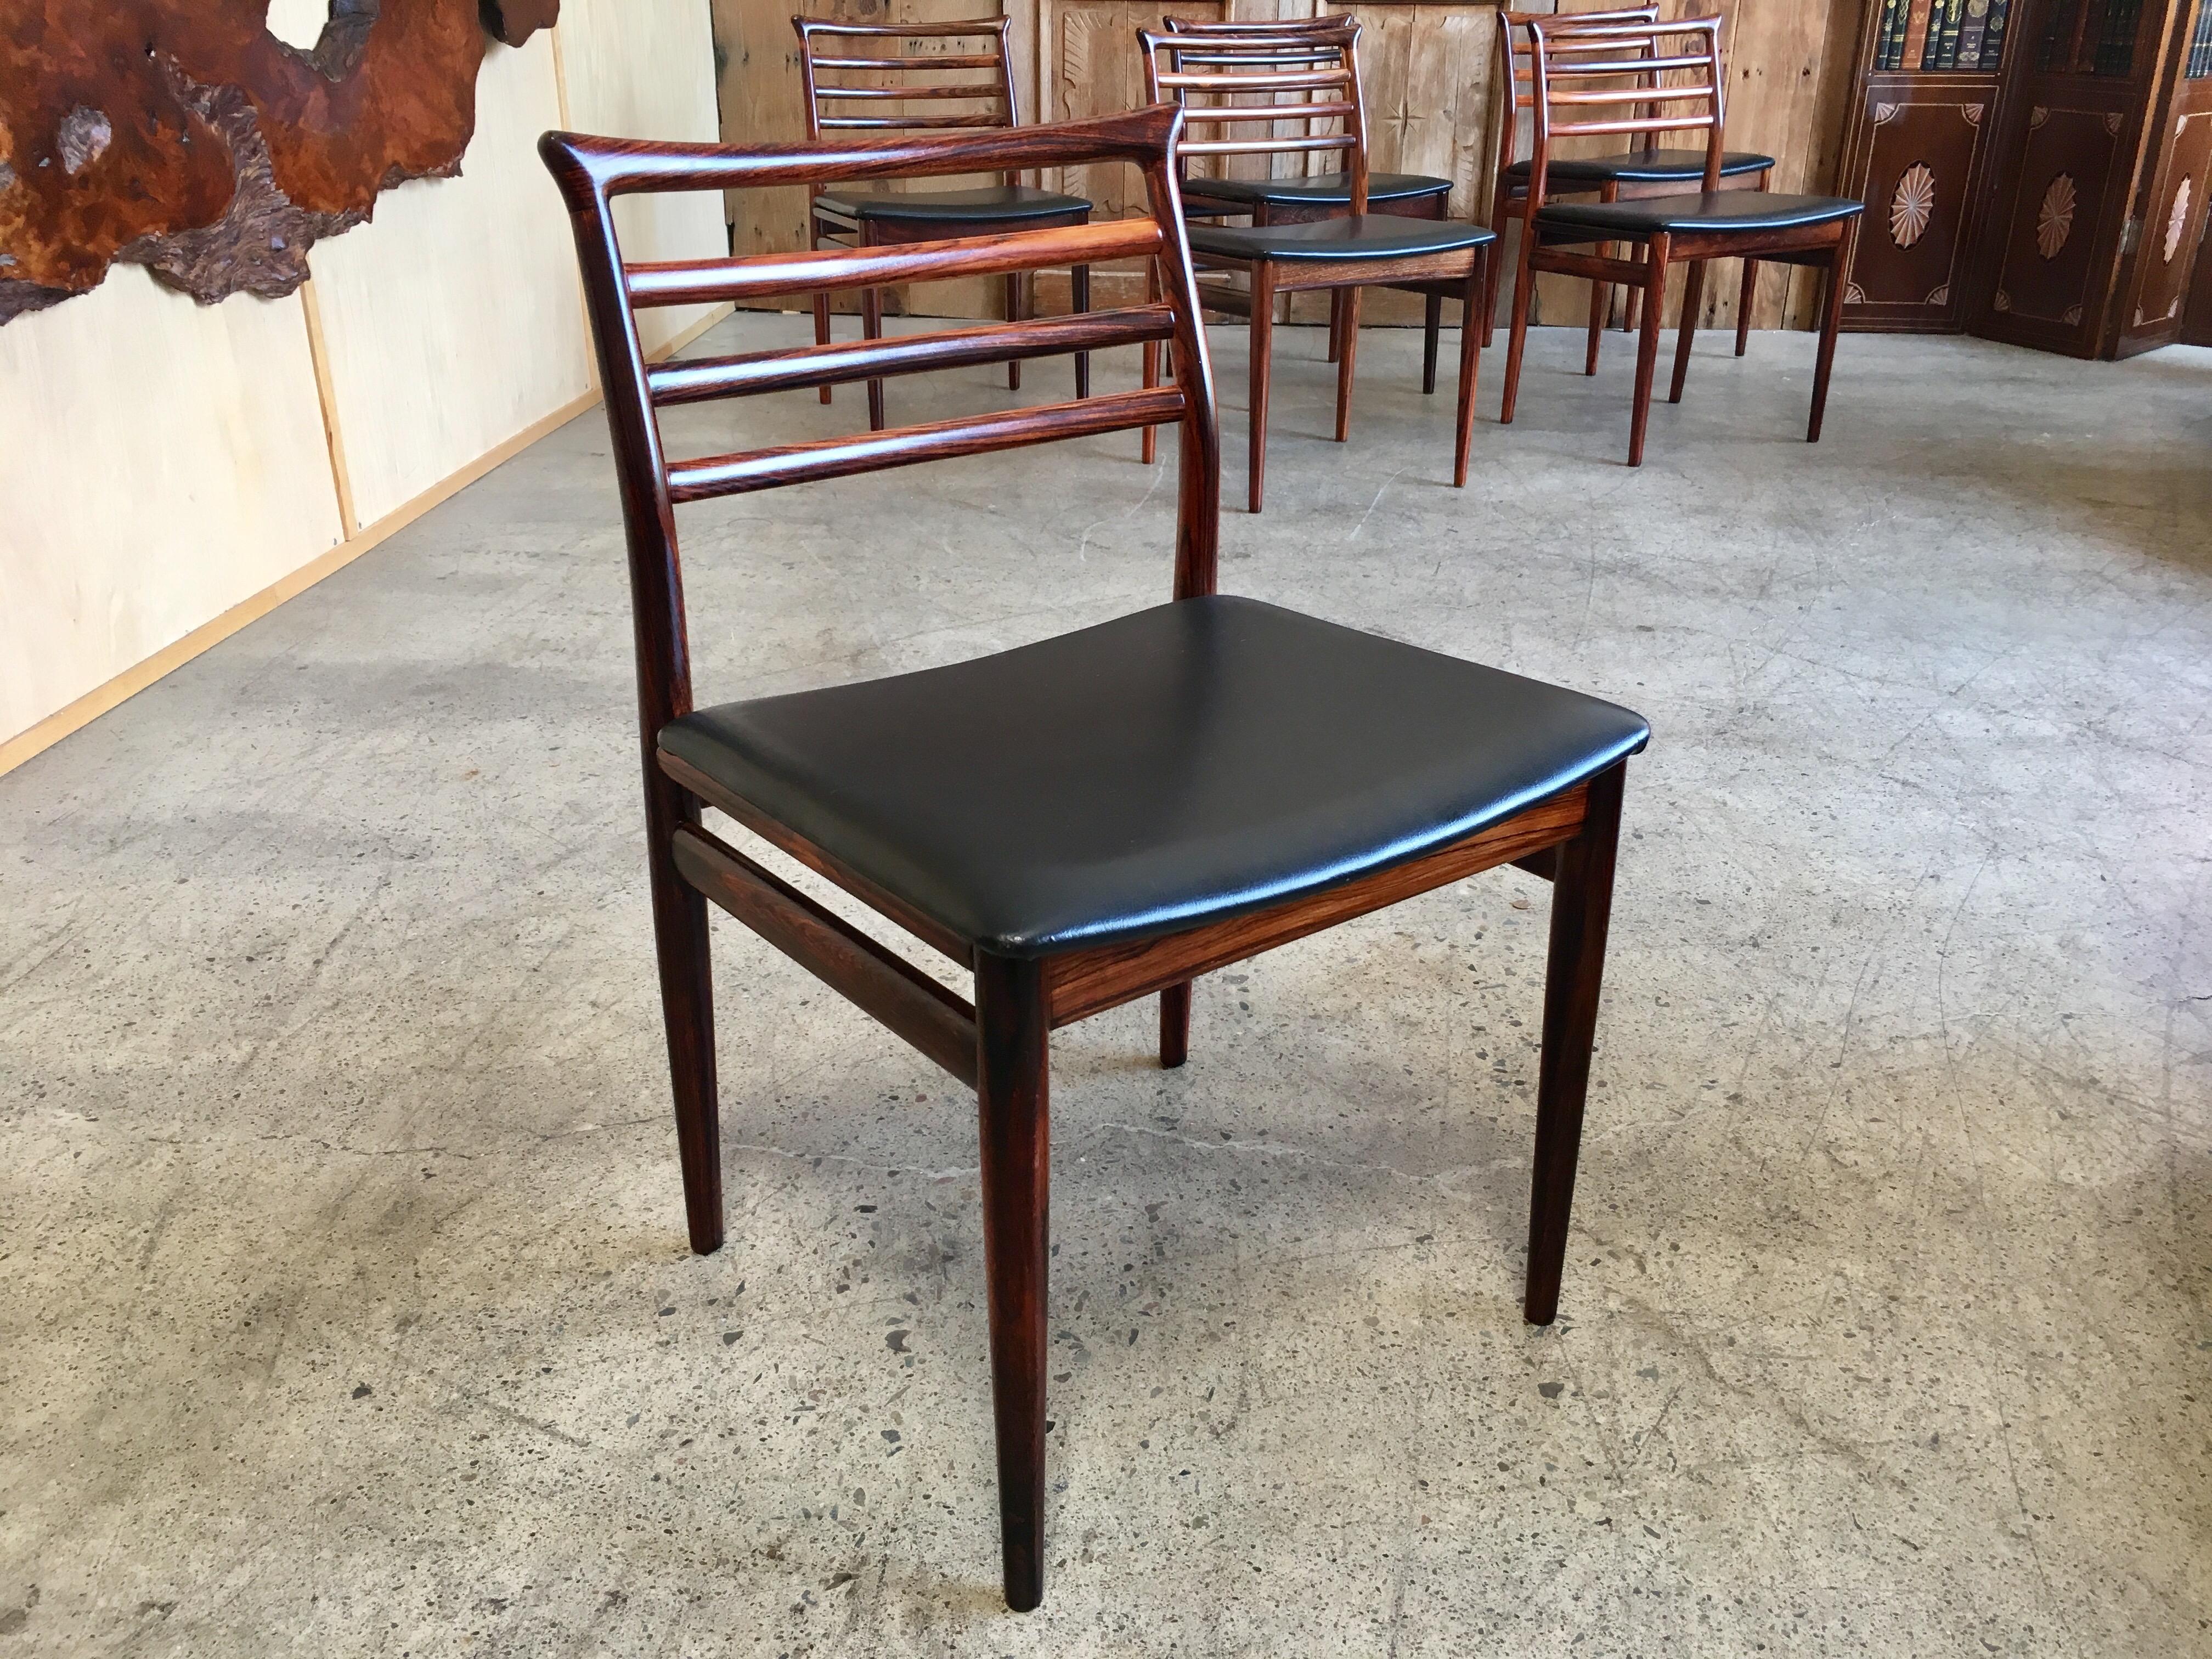 Midcentury Danish modern design chairs by Erling Tovits. These high quality rosewood chairs was manufactured by Sorø stolefabrik in the 1960s.